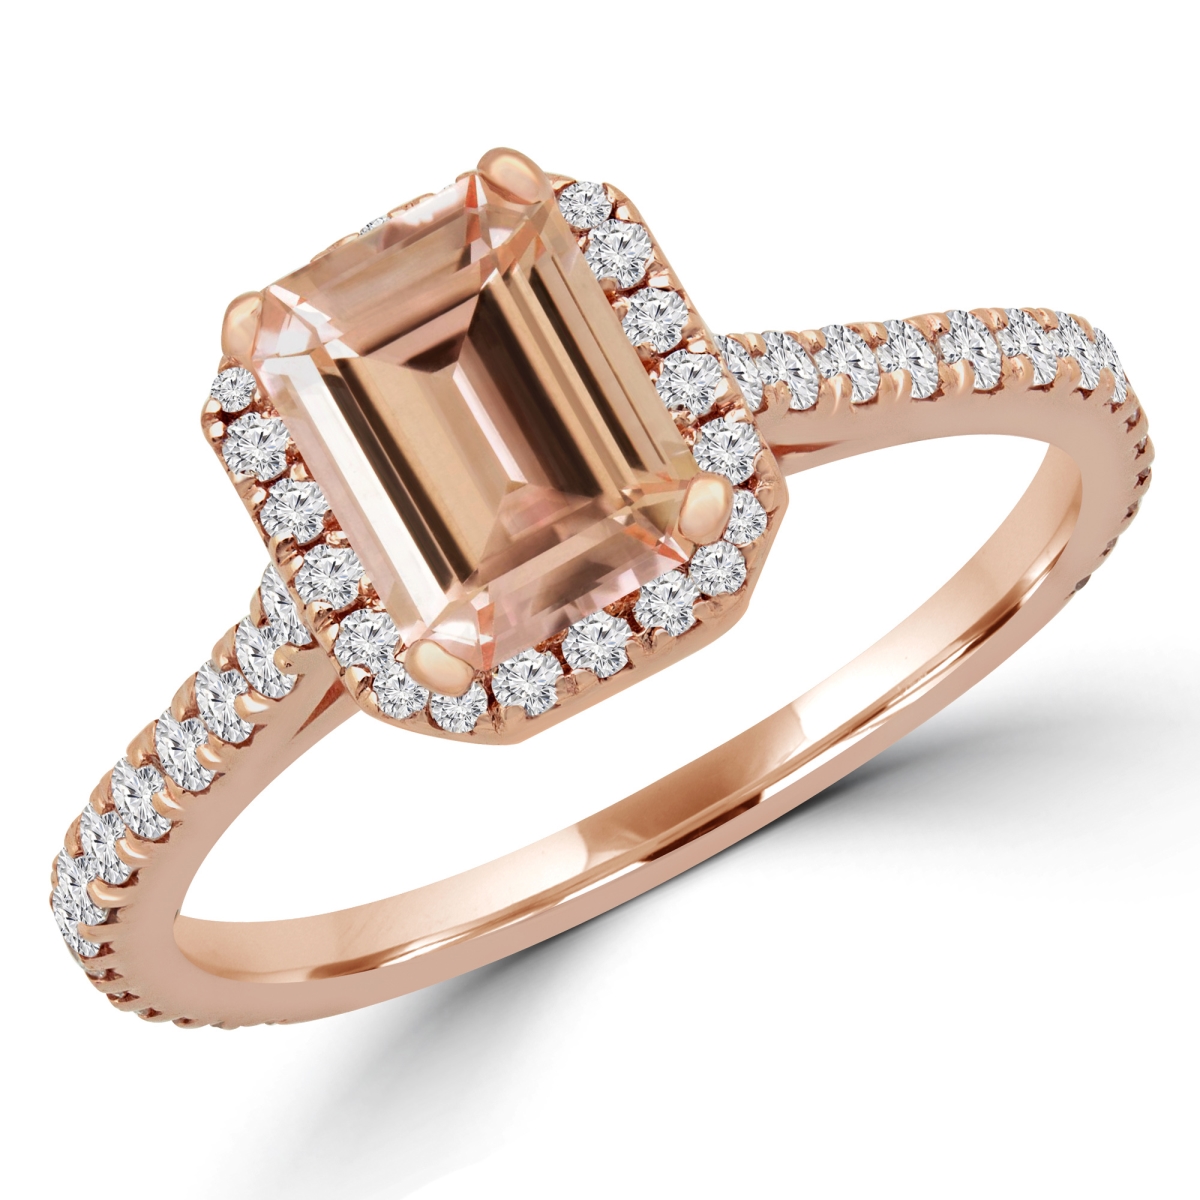 Picture of Majesty Diamonds MD180580-8.75 1.25 CTW Emerald Pink Morganite Halo Engagement Ring in 14K Rose Gold - Size 8.75